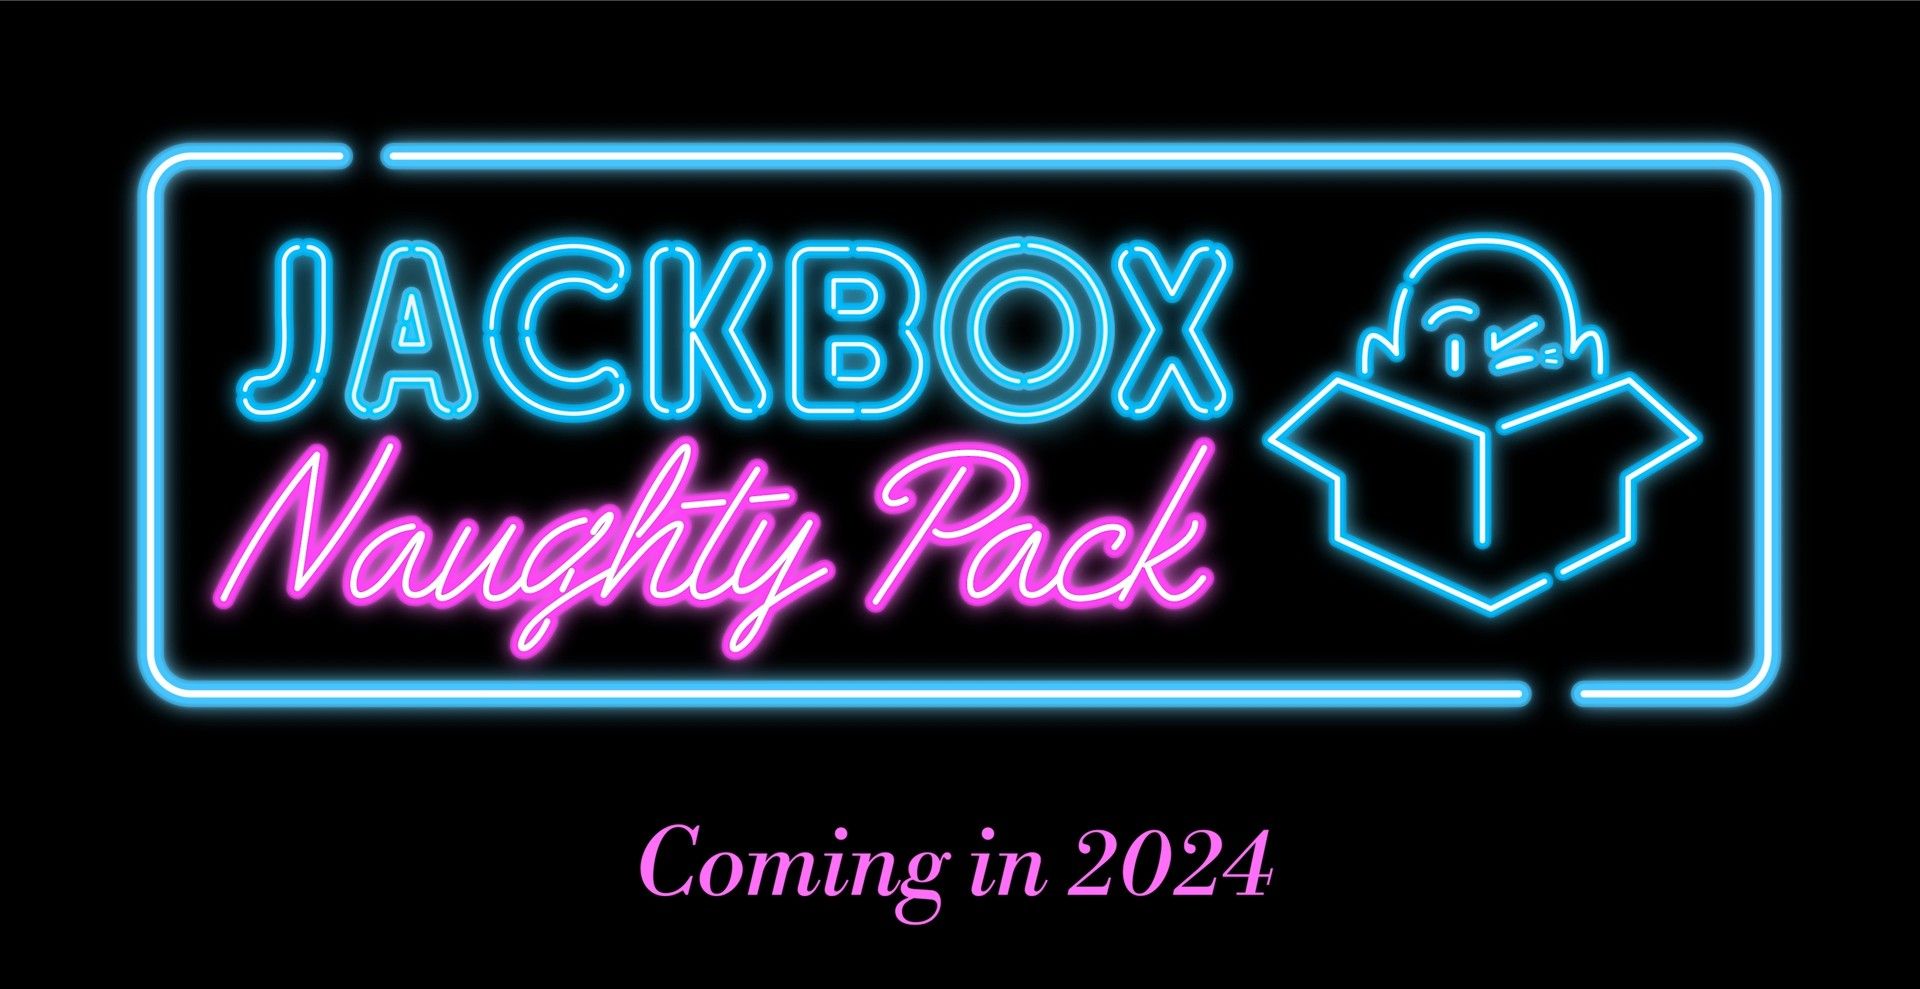 Jackbox Games CEO On Creating A New Naughty Pack Where The "Sky's The Limit"